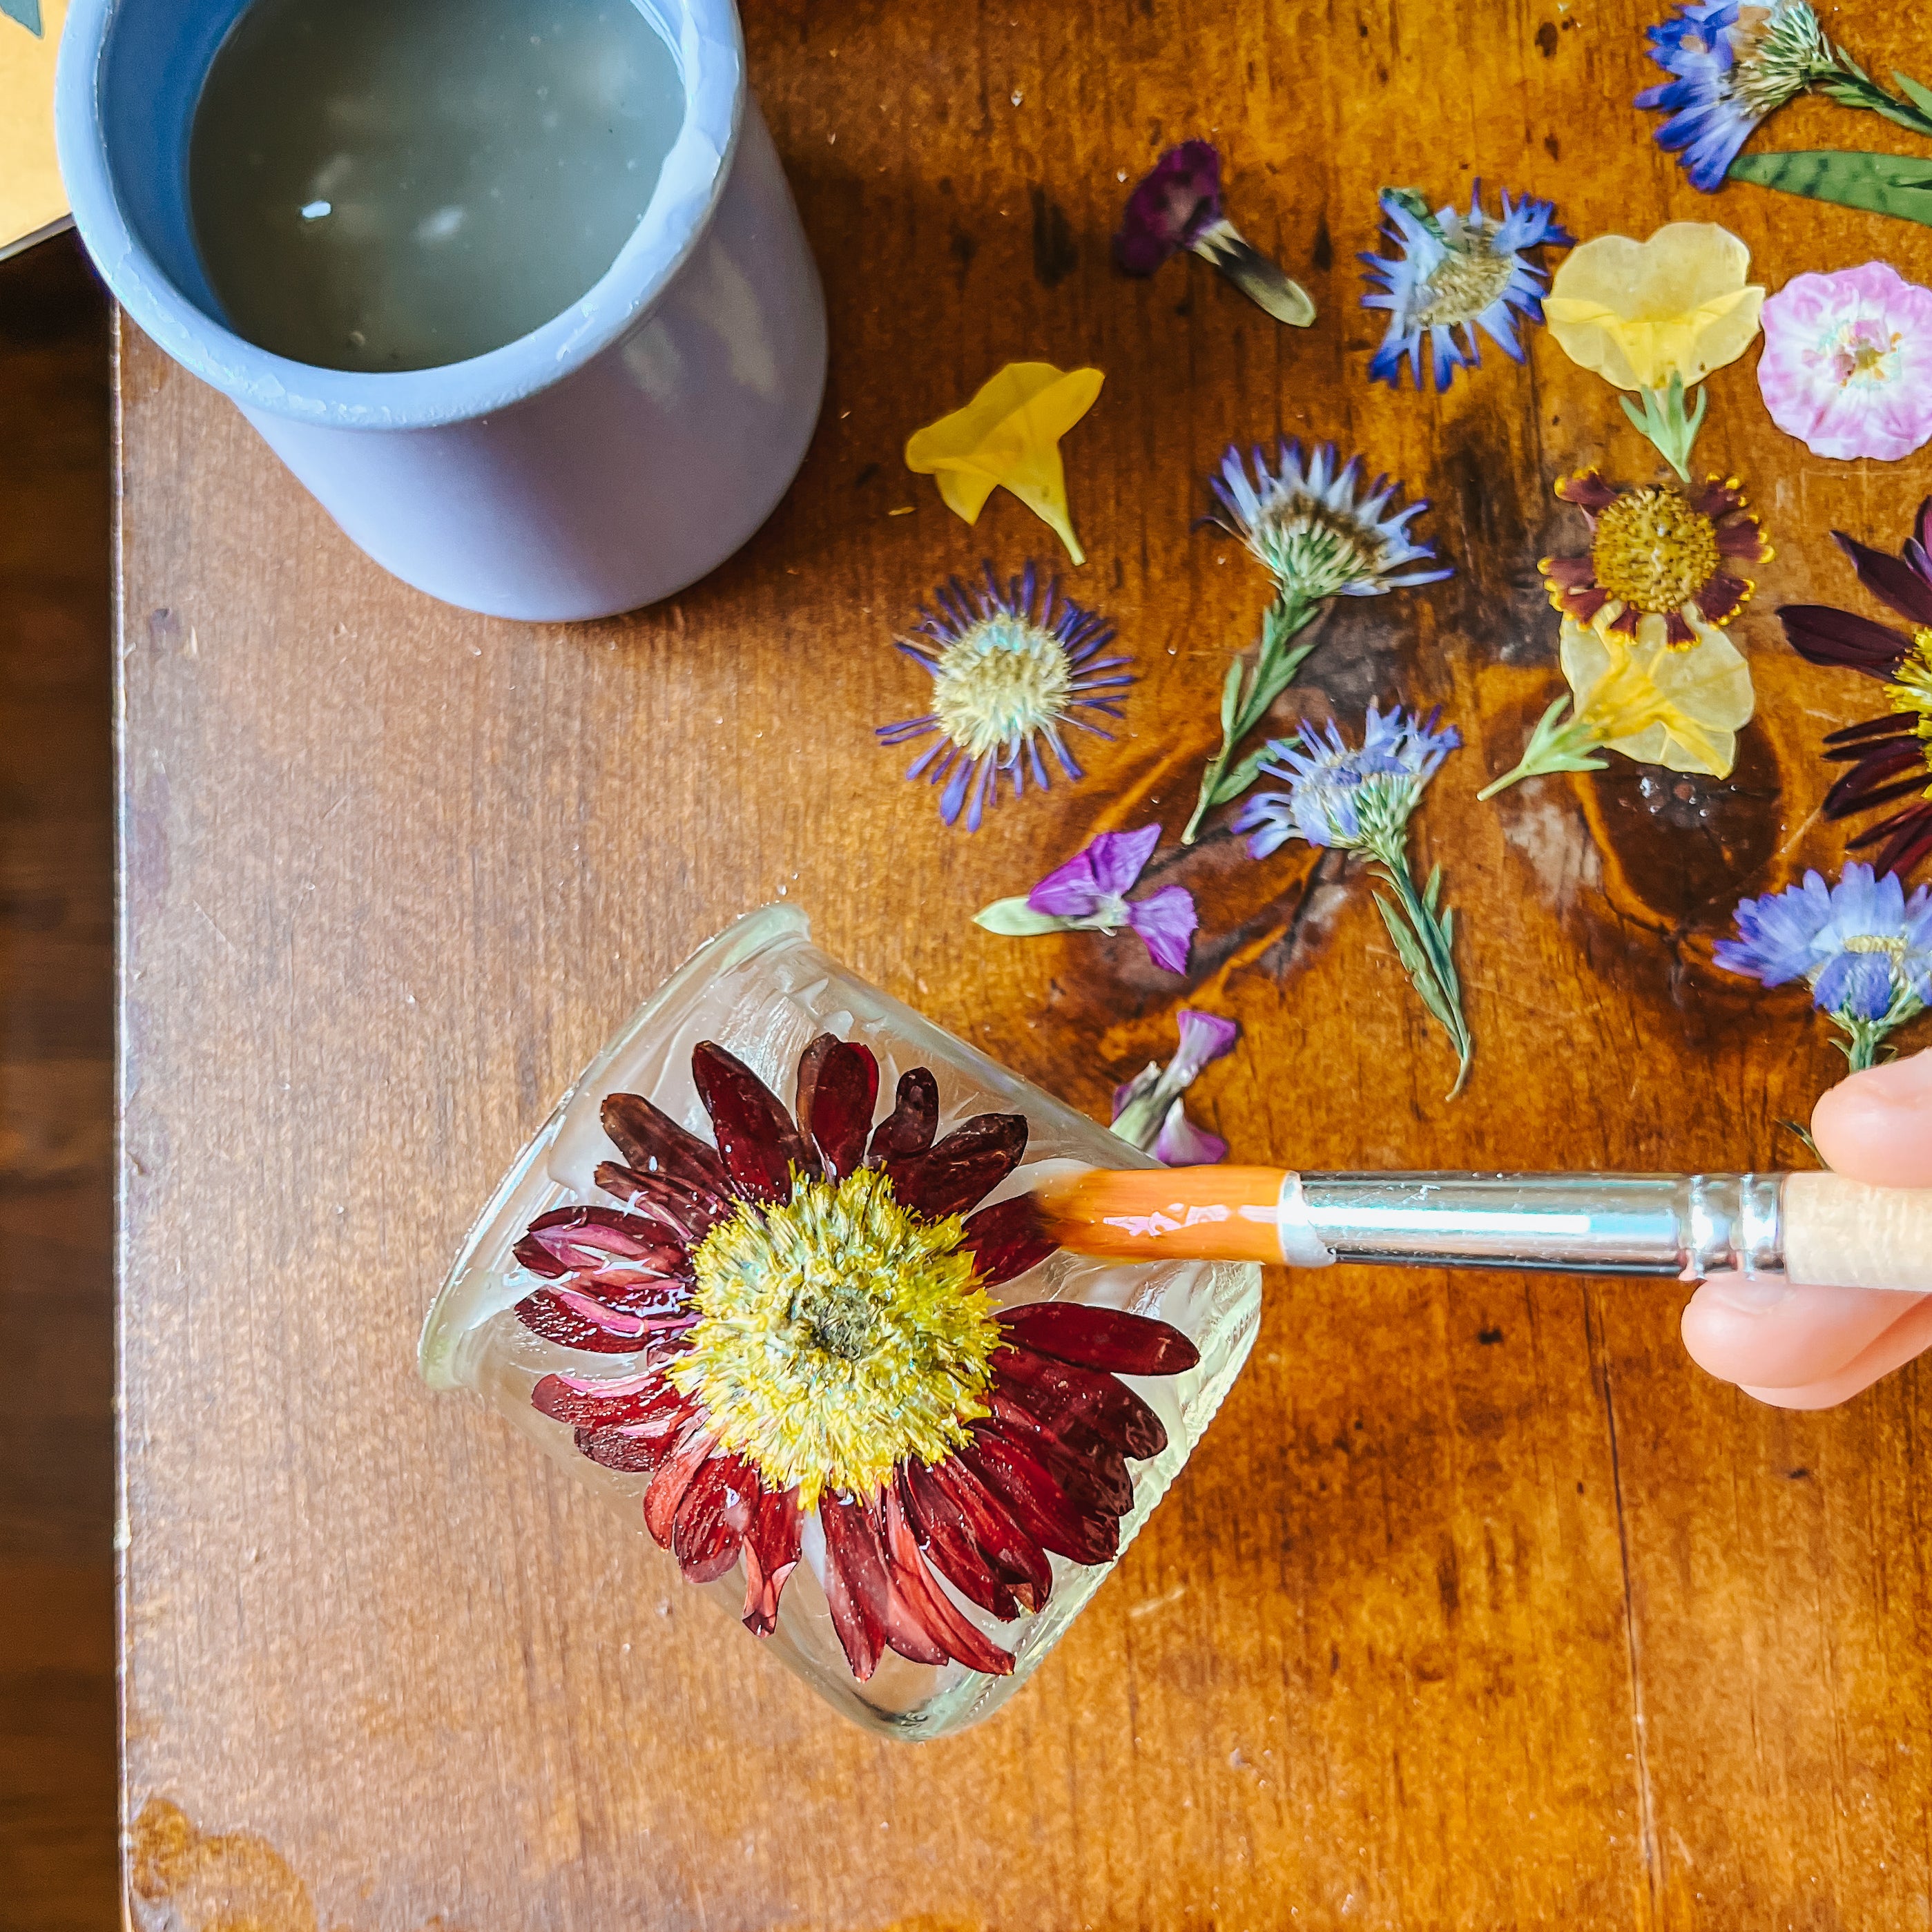 A paint brush gently paints glue over flowers.